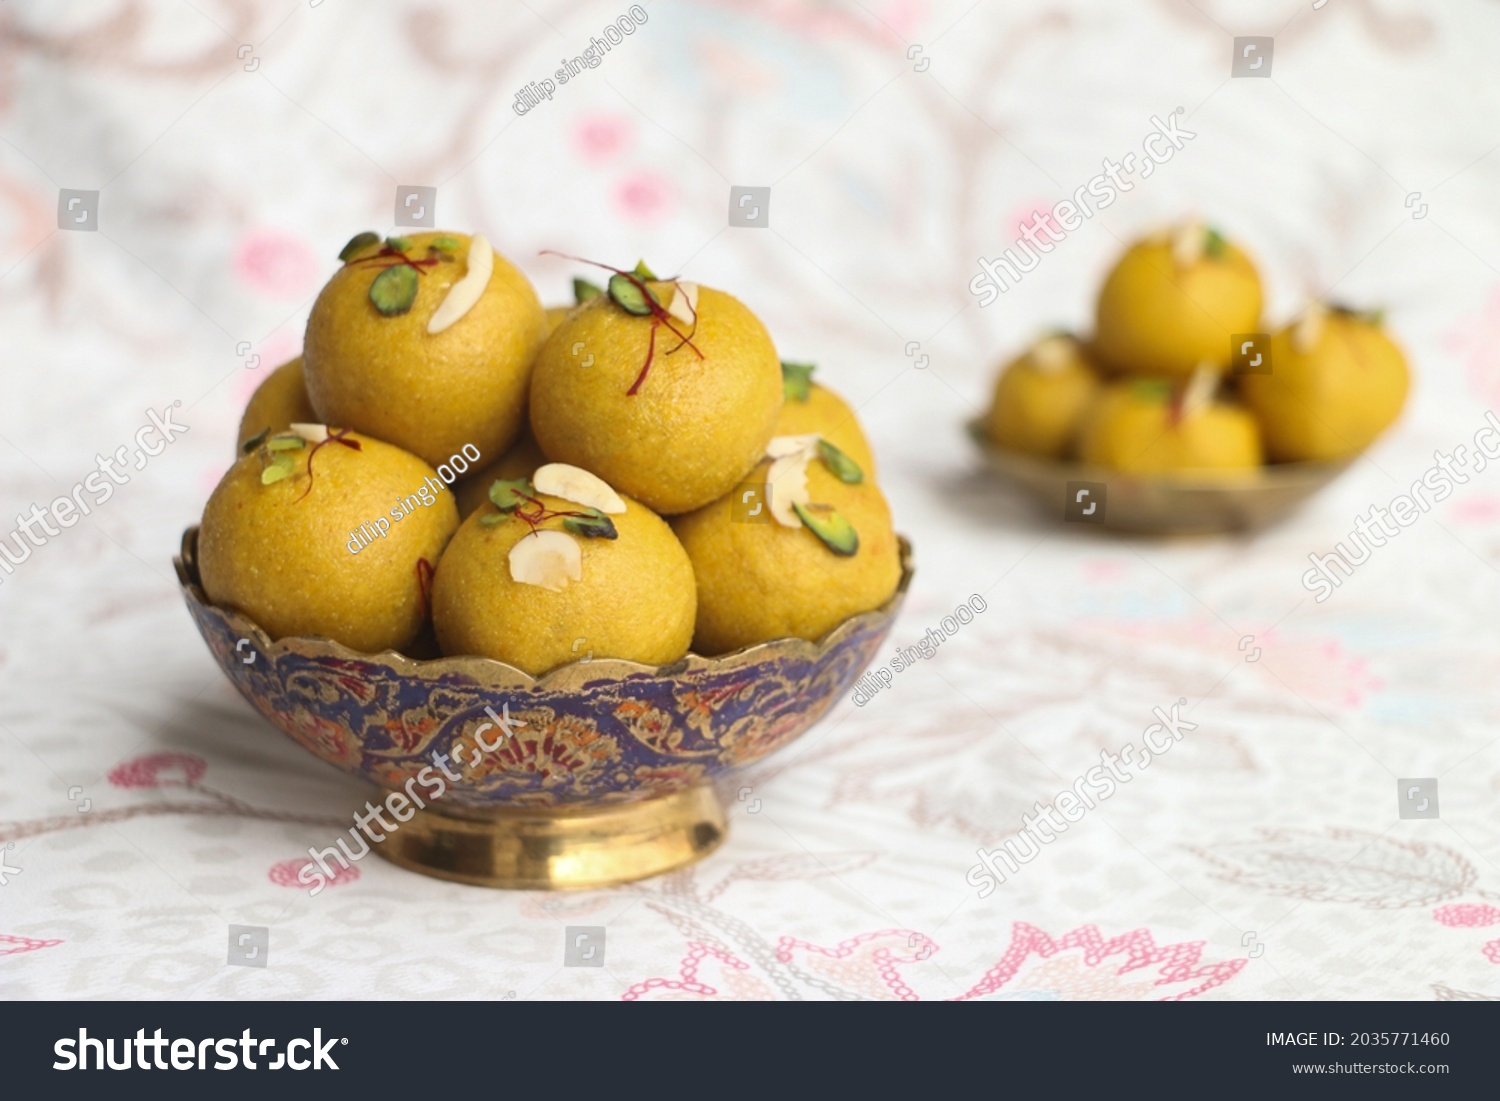 happy ganesh chaturthi, Besan laddu with dry fruits in a brass bowl on a floral background, landscape image, #2035771460